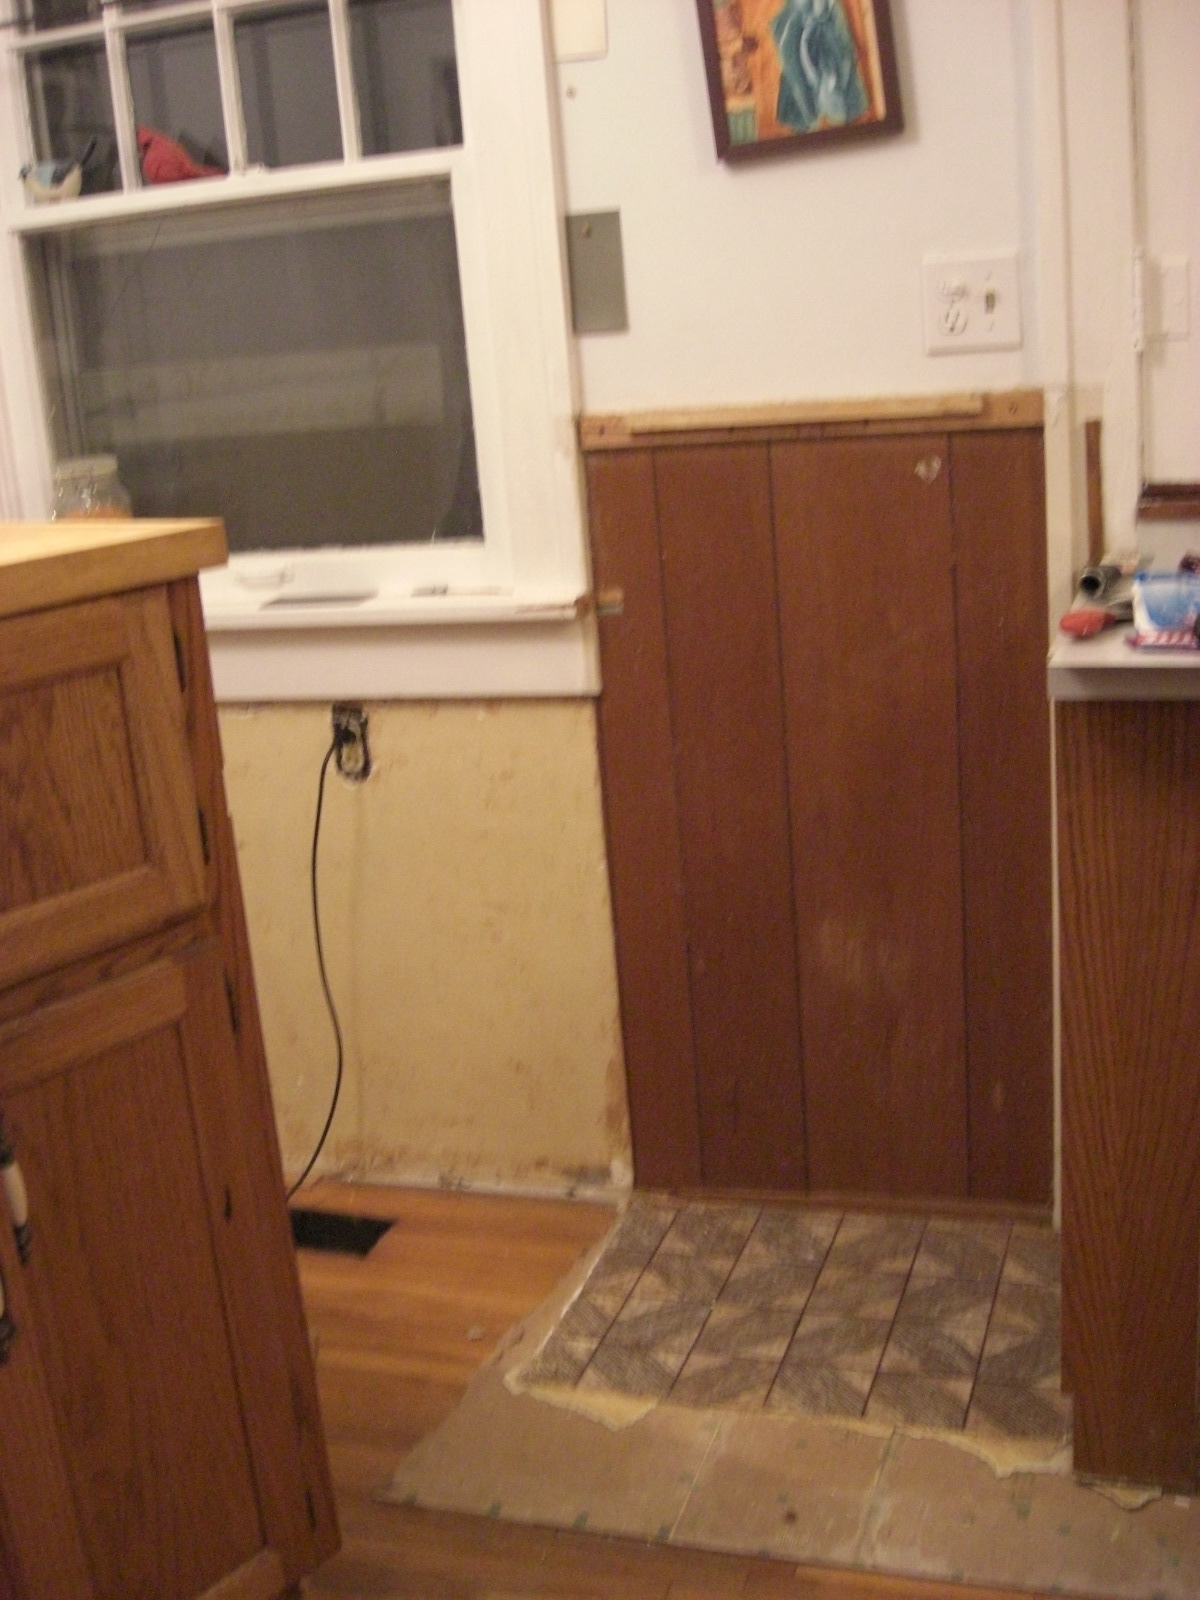  fact that there was once wood paneling in the kitchen  pre fake